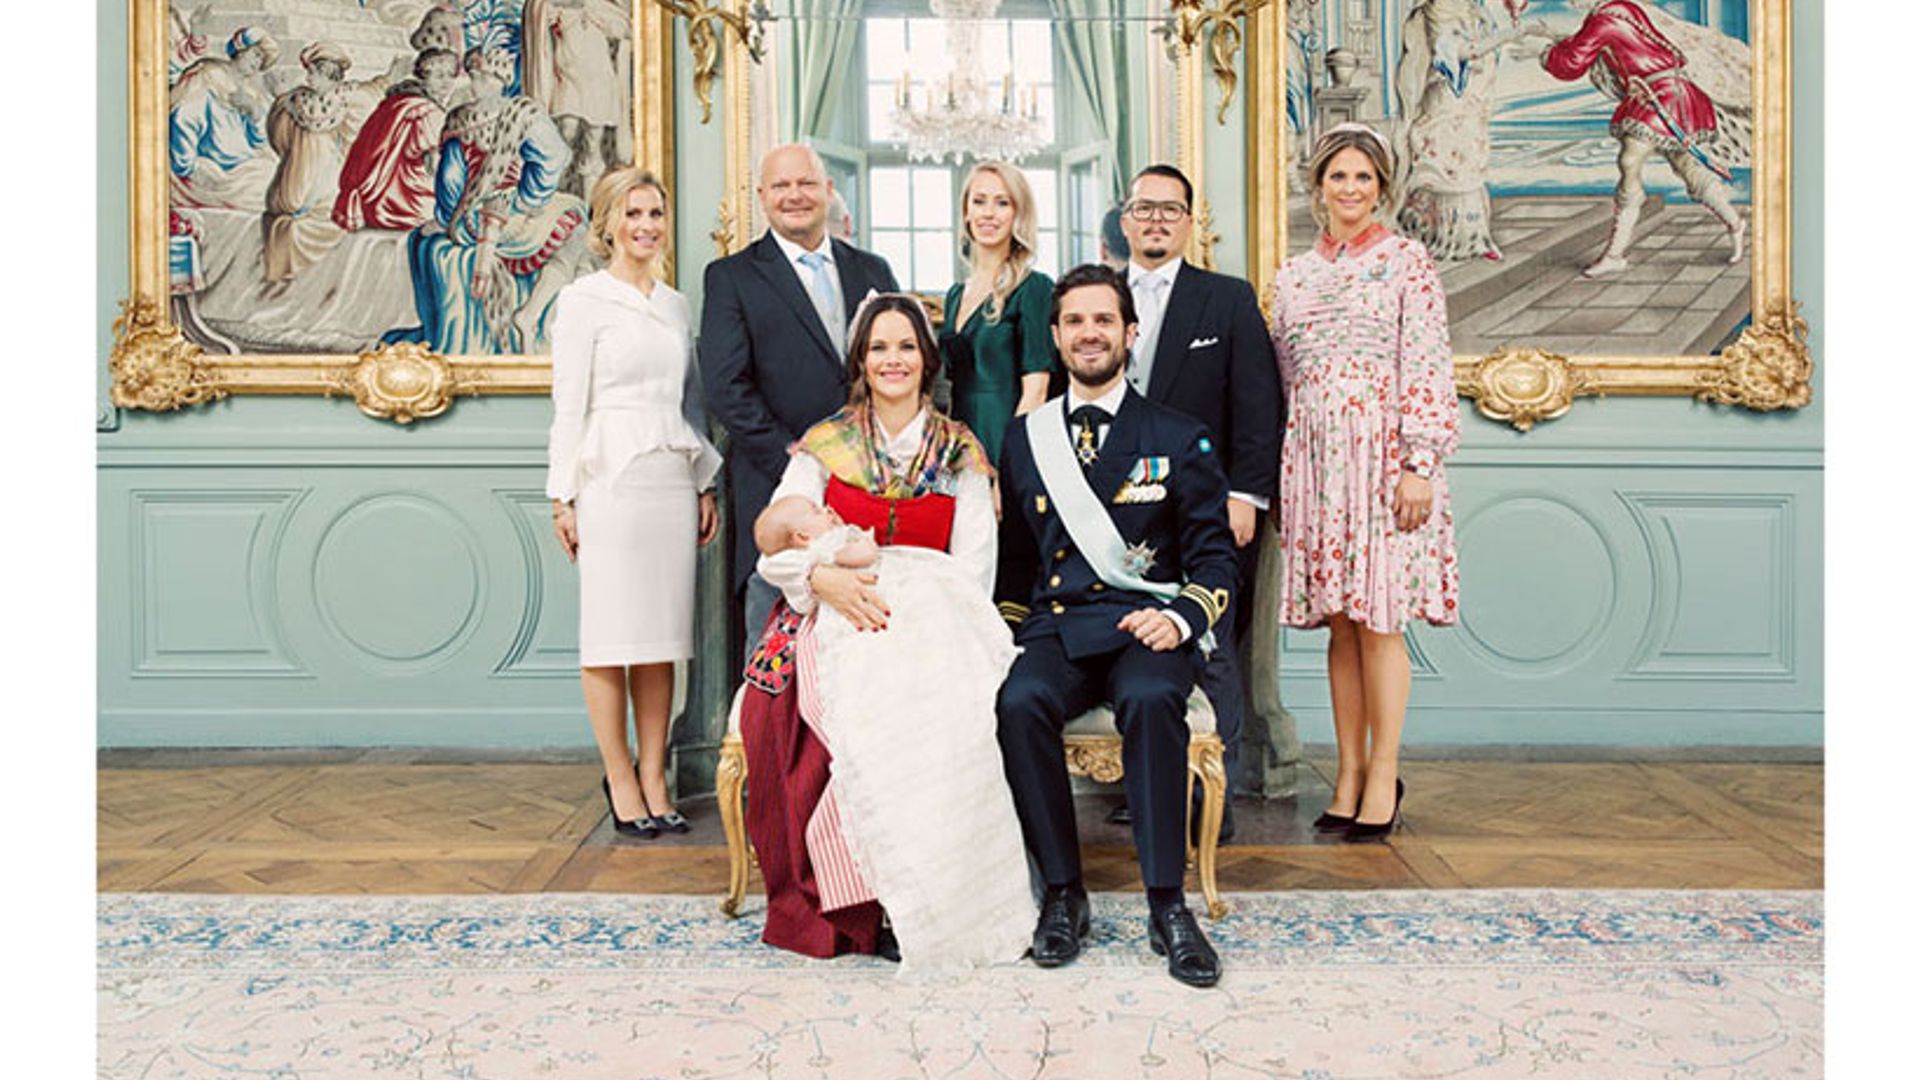 Prince Gabriel of Sweden's official christening photos released